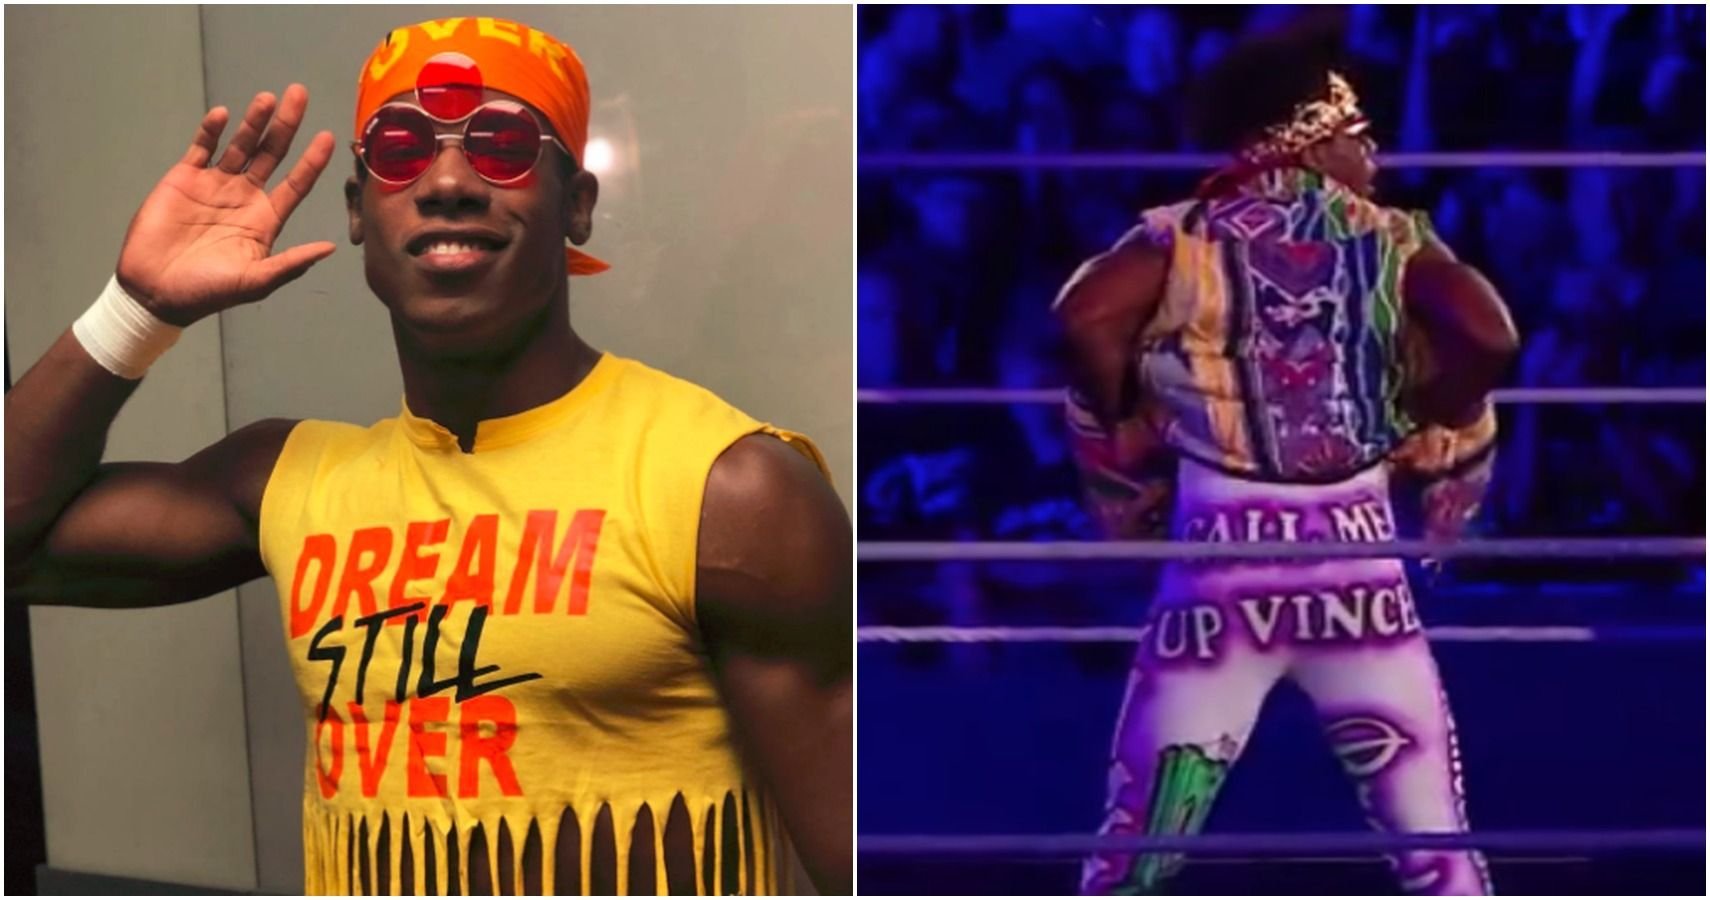 Velveteen Dream's Troubled WWE Career And Release, Explained